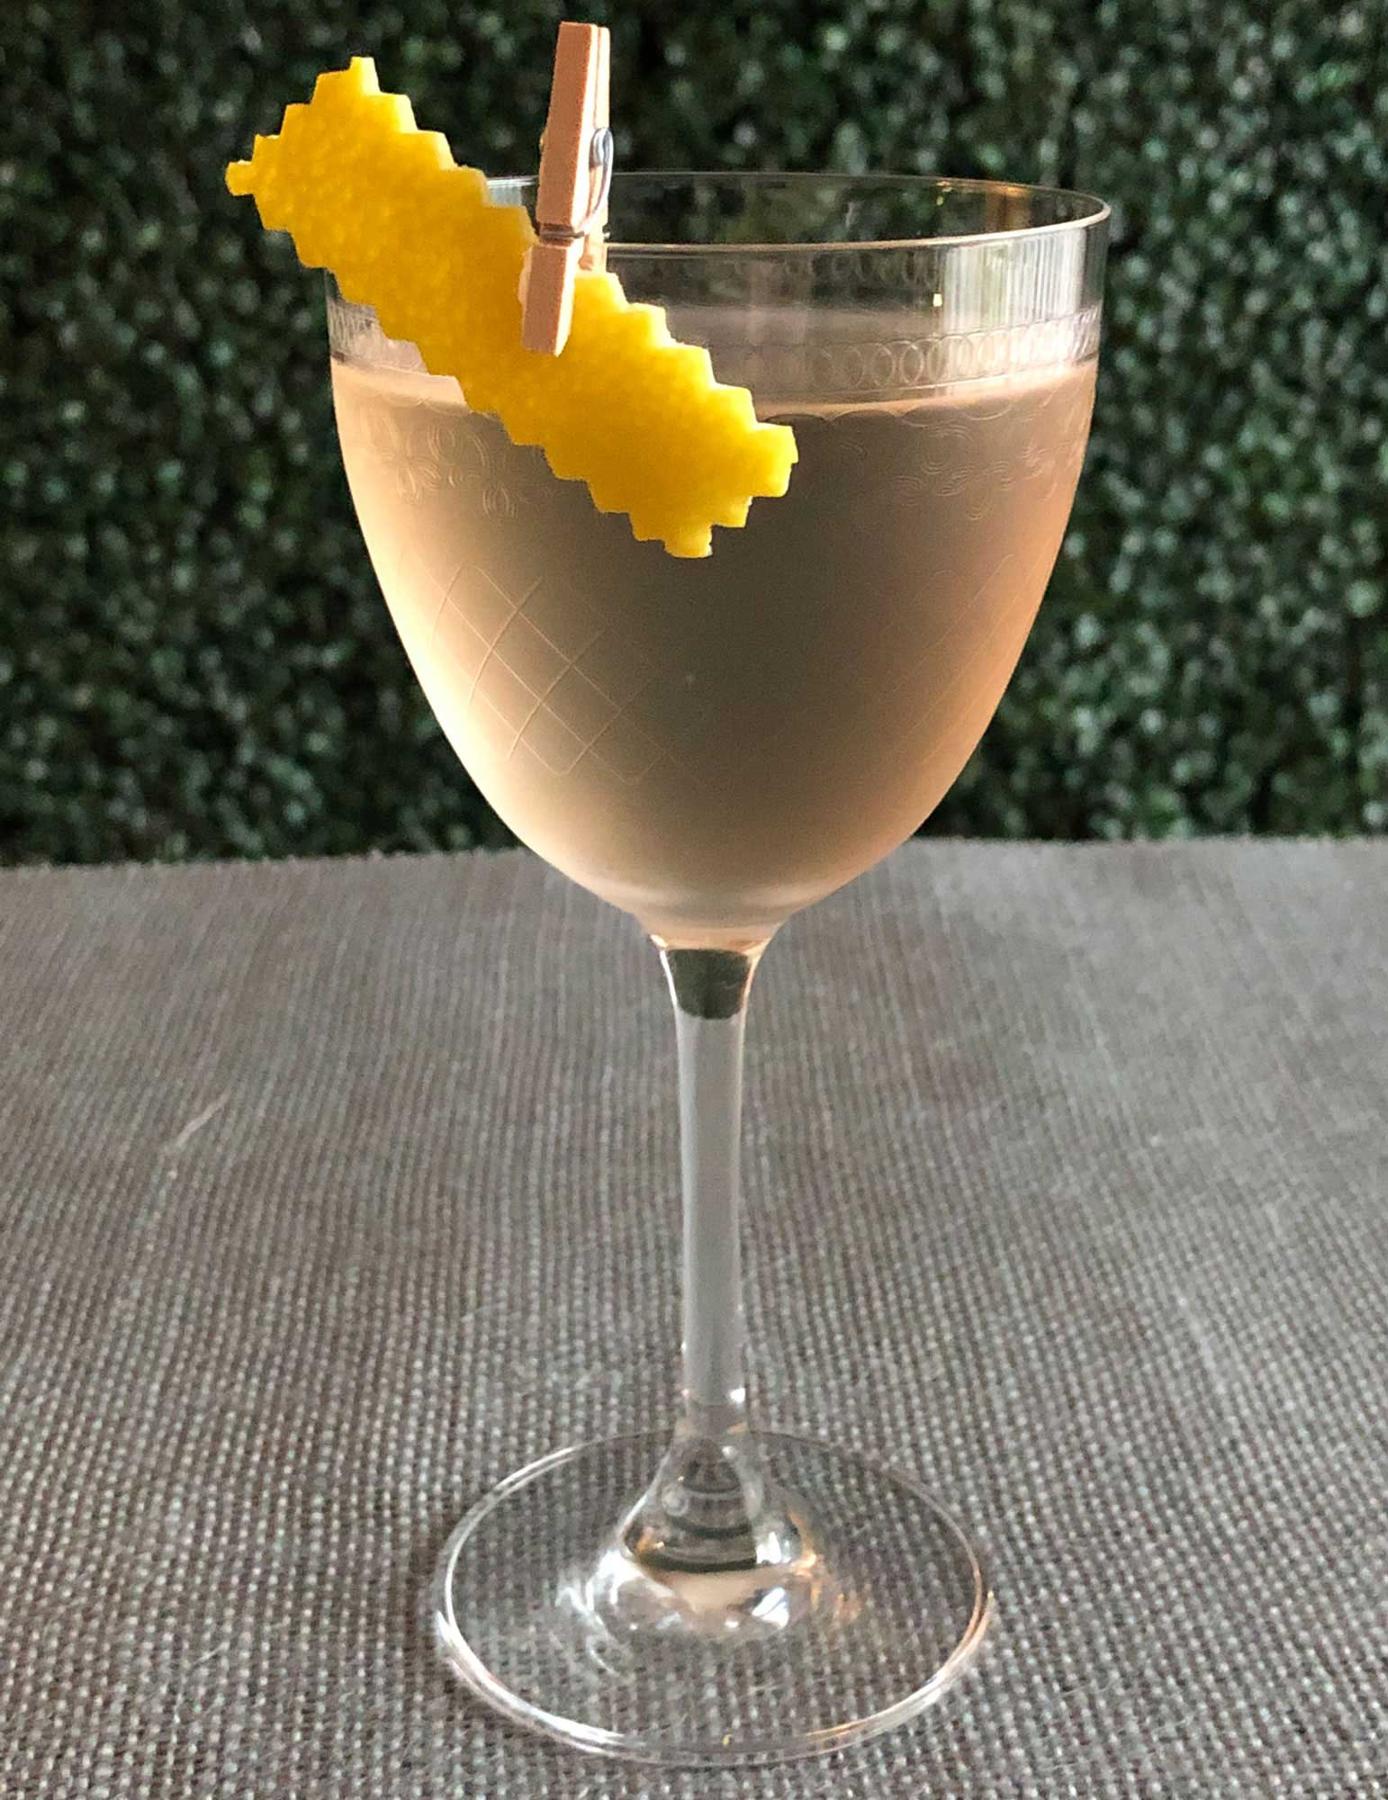 An example of the Alpine Martini, the mixed drink (drink) featuring Hayman’s London Dry Gin, Dolin Dry Vermouth de Chambéry, Zirbenz Stone Pine Liqueur of the Alps, and lemon twist; photo by Lee Edwards